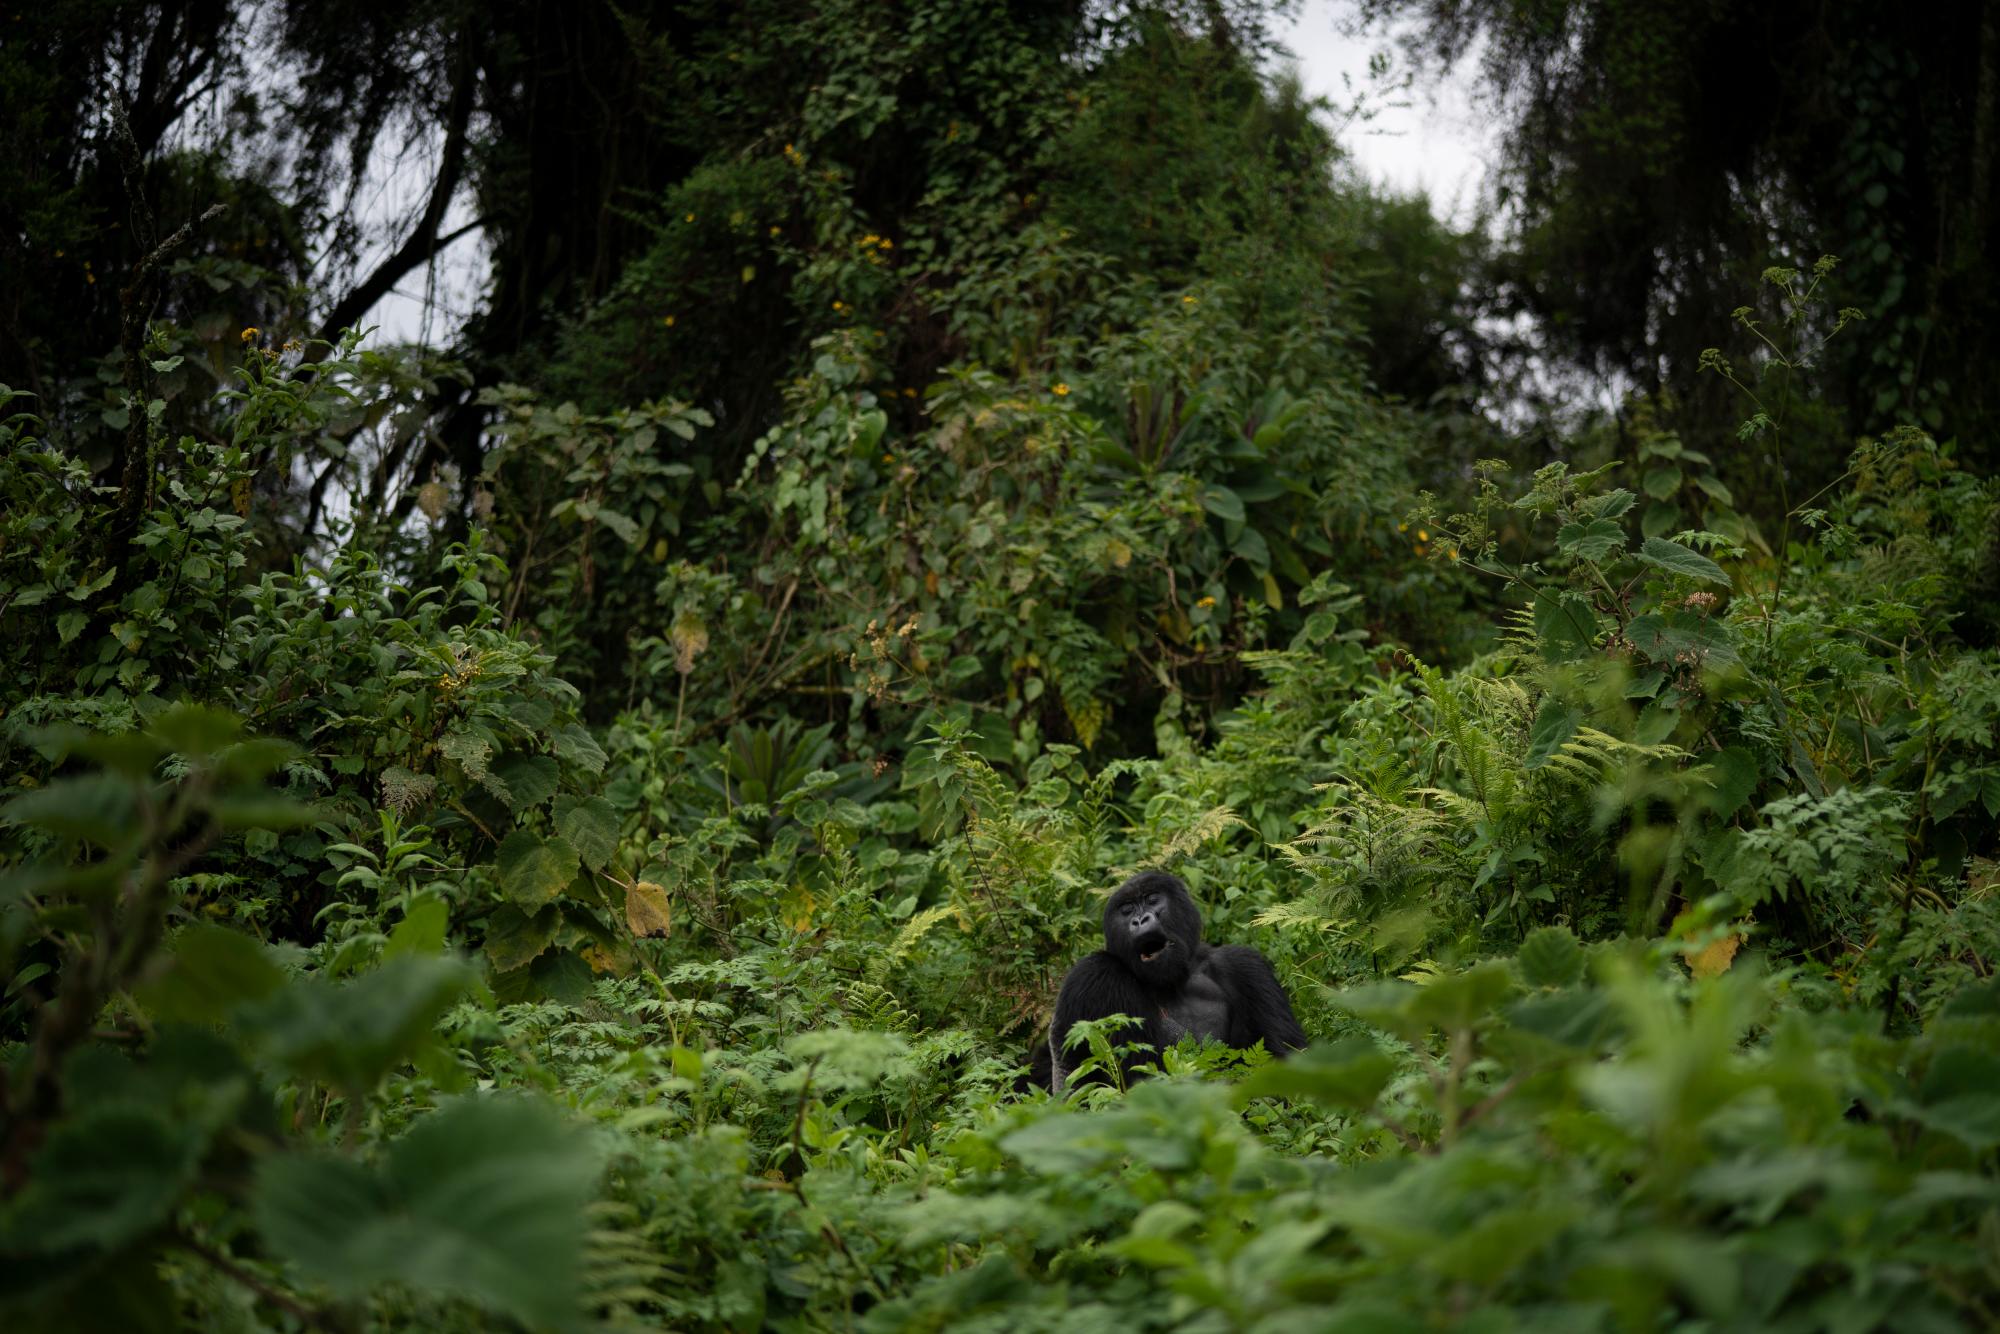  In this Sept. 3, 2019 photo, a silverback mountain gorilla named Pato sits in the Volcanoes National Park, Rwanda. “The population of mountain gorillas is still vulnerable,” says George Schaller, a renowned biologist and gorilla expert. “But their numbers are now growing, and that’s remarkable.” 